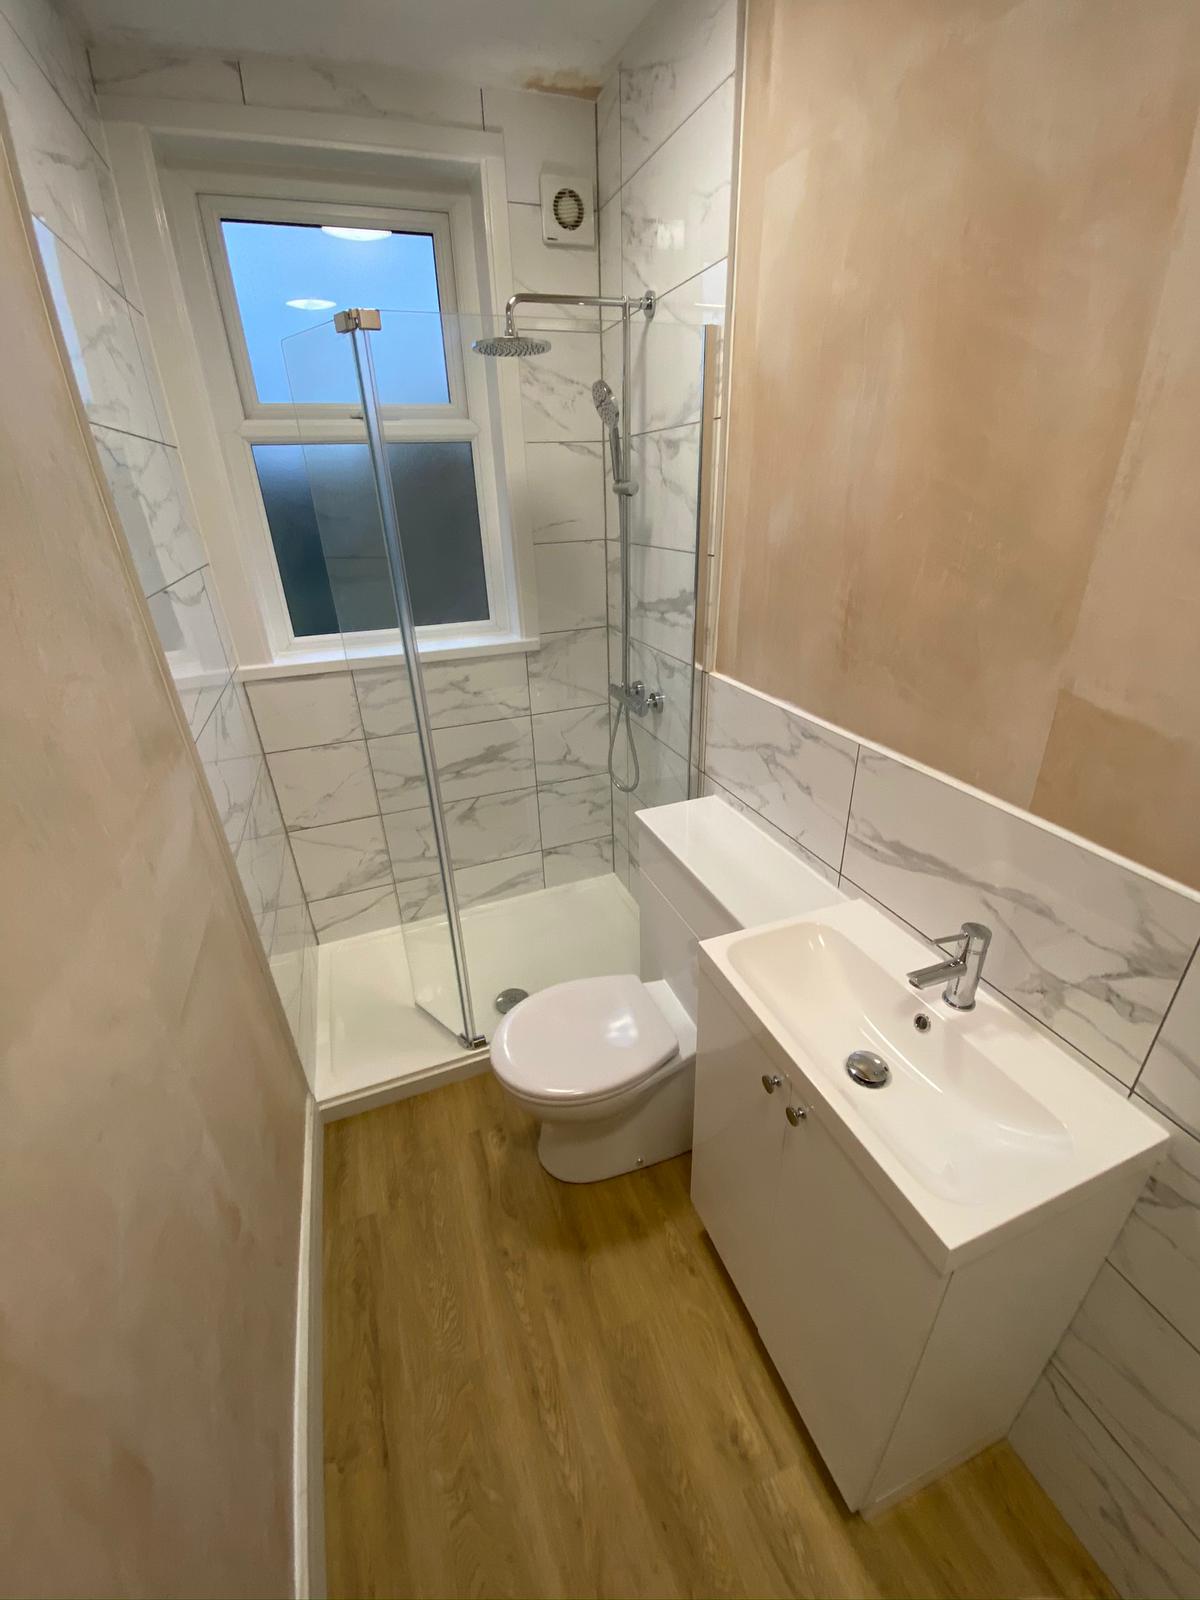 Narrow Bathroom Conversion - No need to compromise on luxury